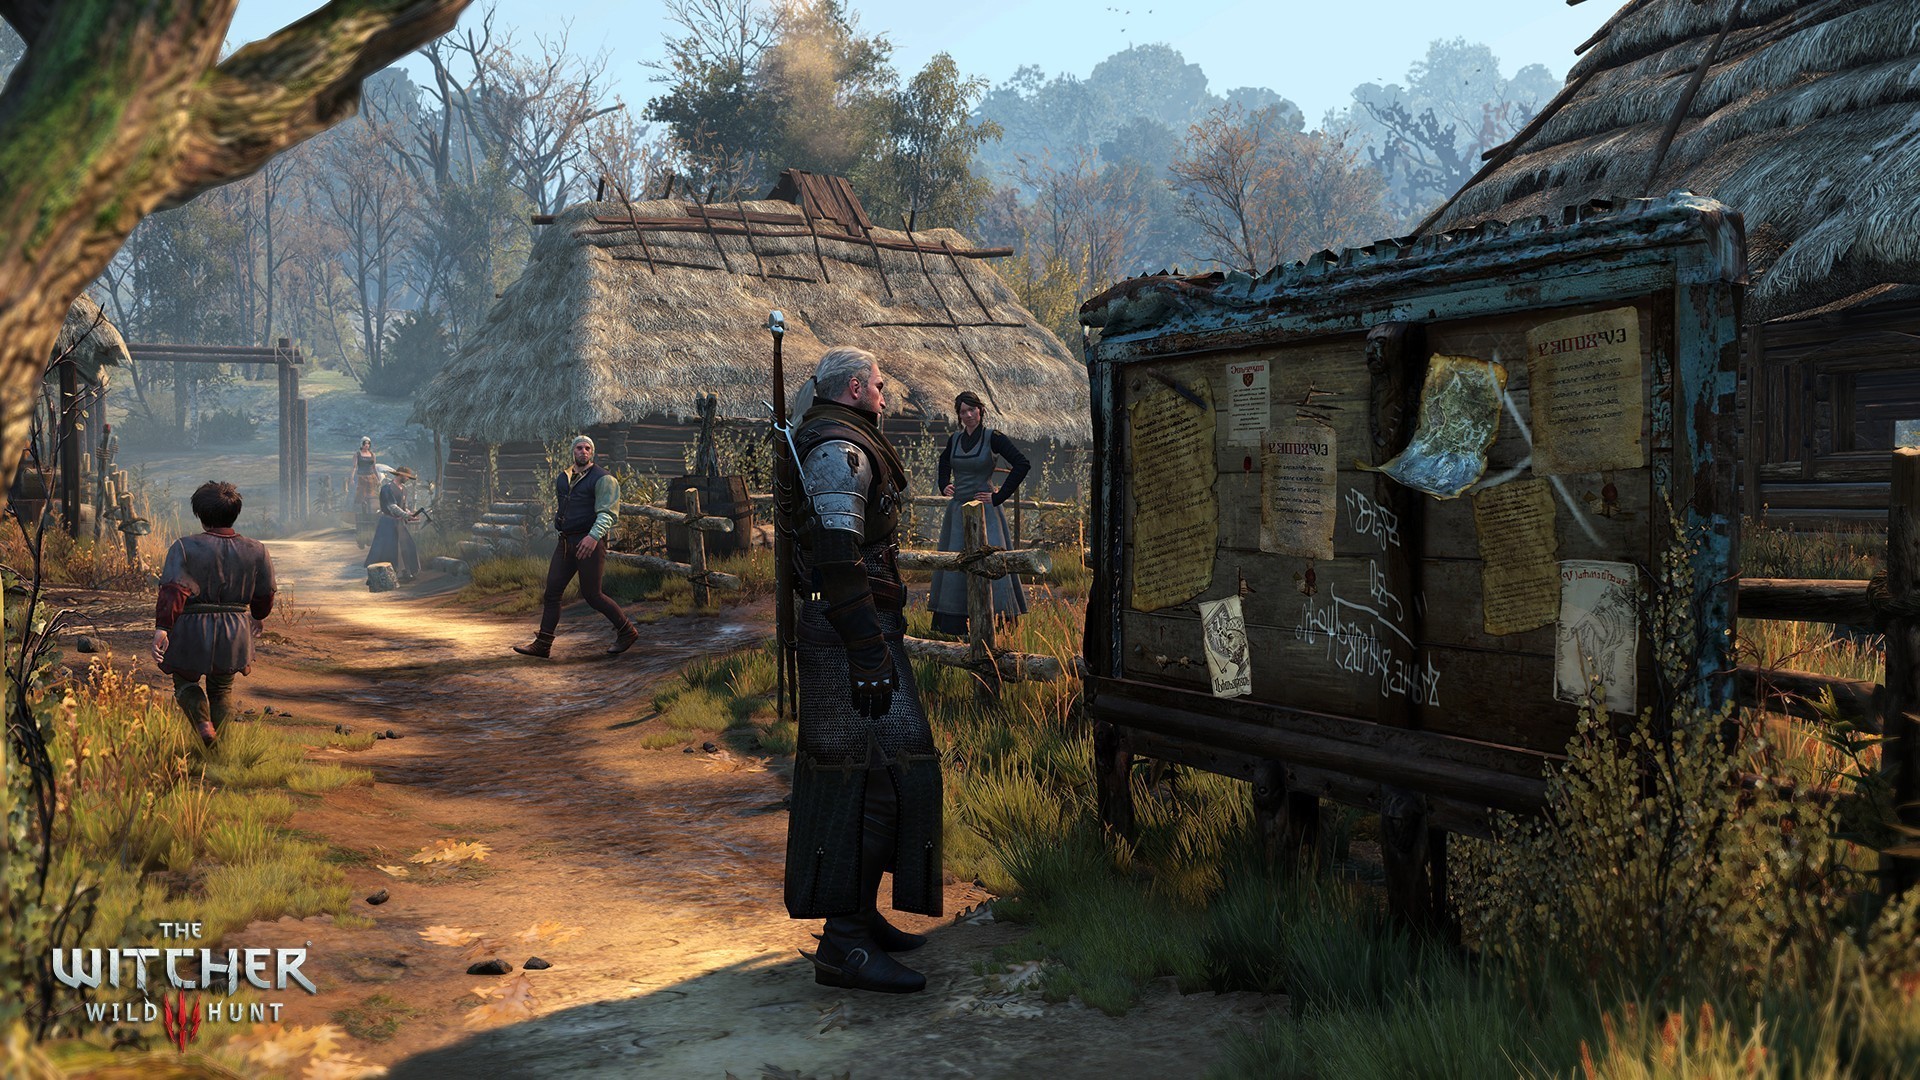 Dragon Age Inquisition Has Too Many Fetch Quests The Witcher 3 Designer Says